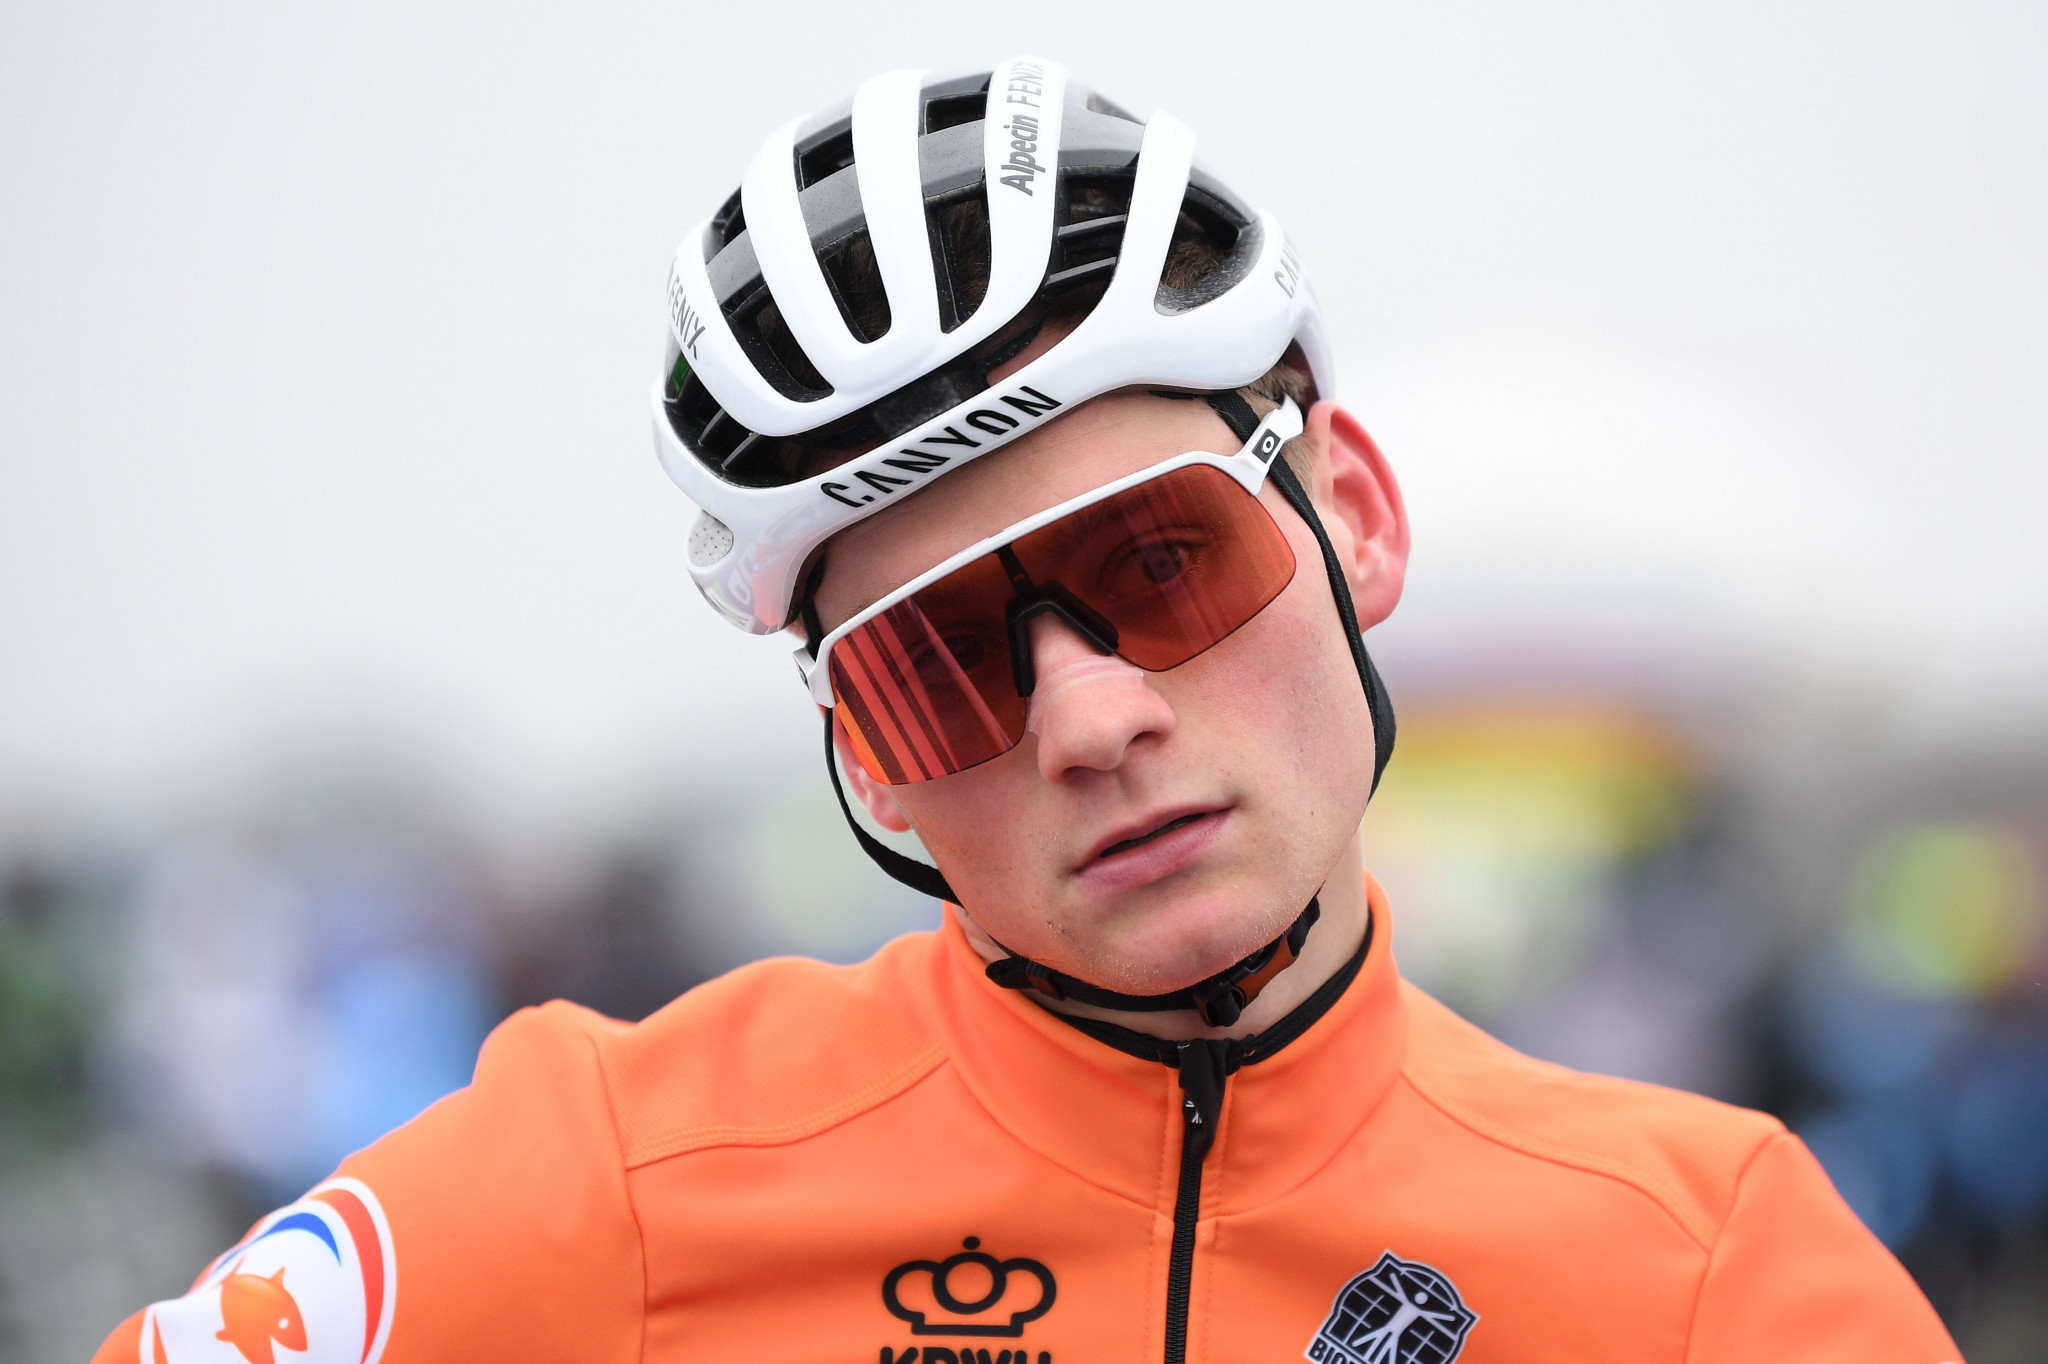 The Netherlands four-time cyclo-cross world champion Mathieu van der Poel will prioritise Tokyo 2020 ©Getty Images